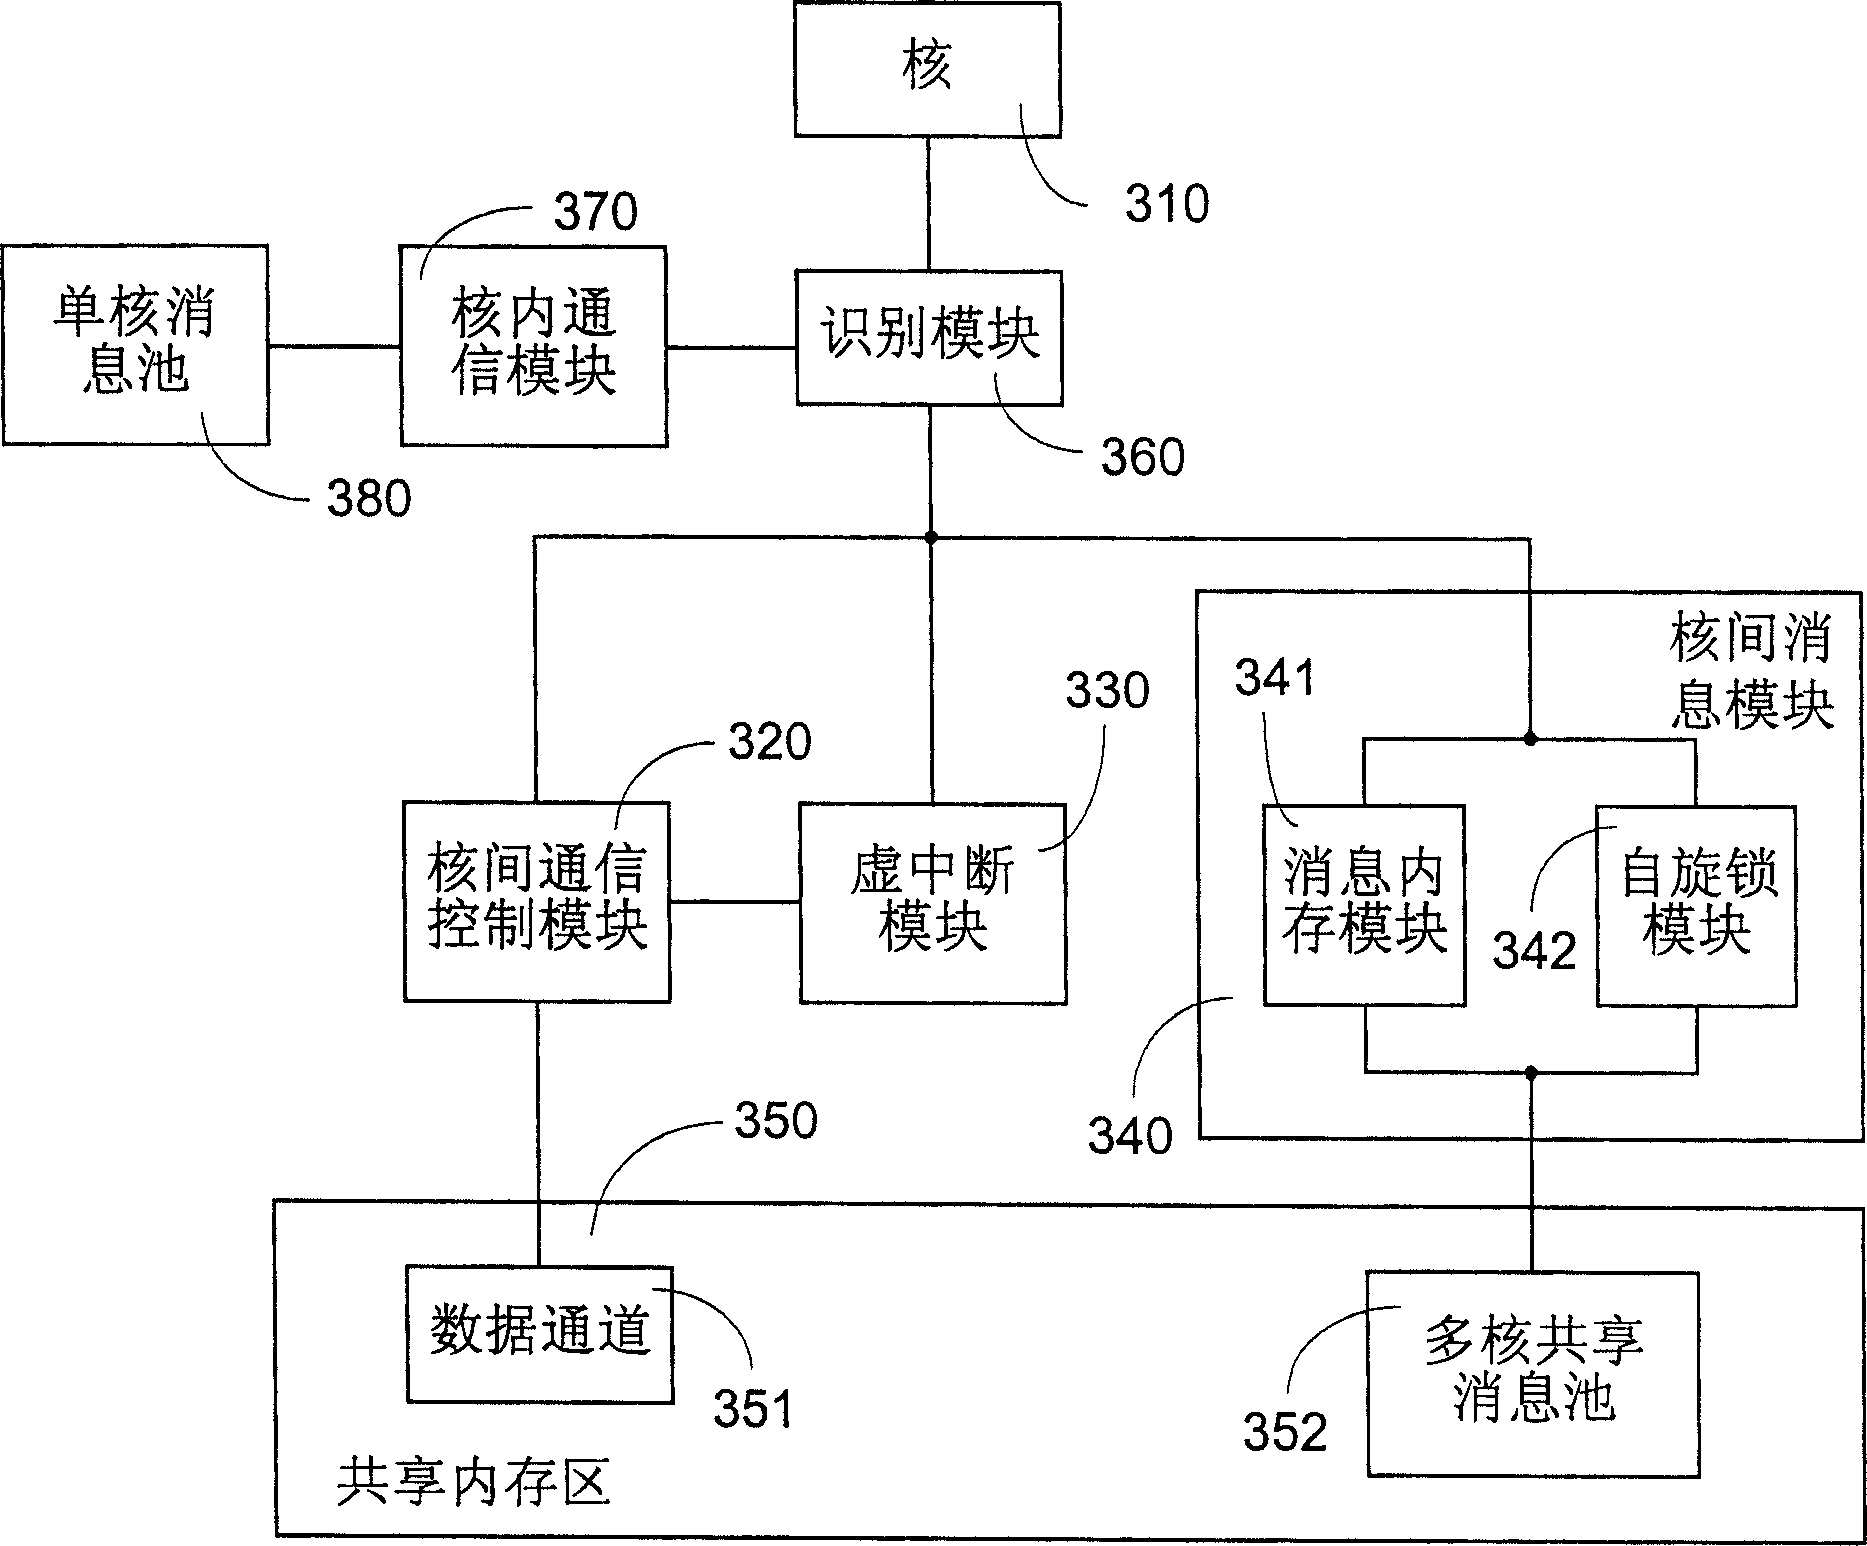 Inter core communication method and apparatus for multi-core processor in embedded real-time operating system